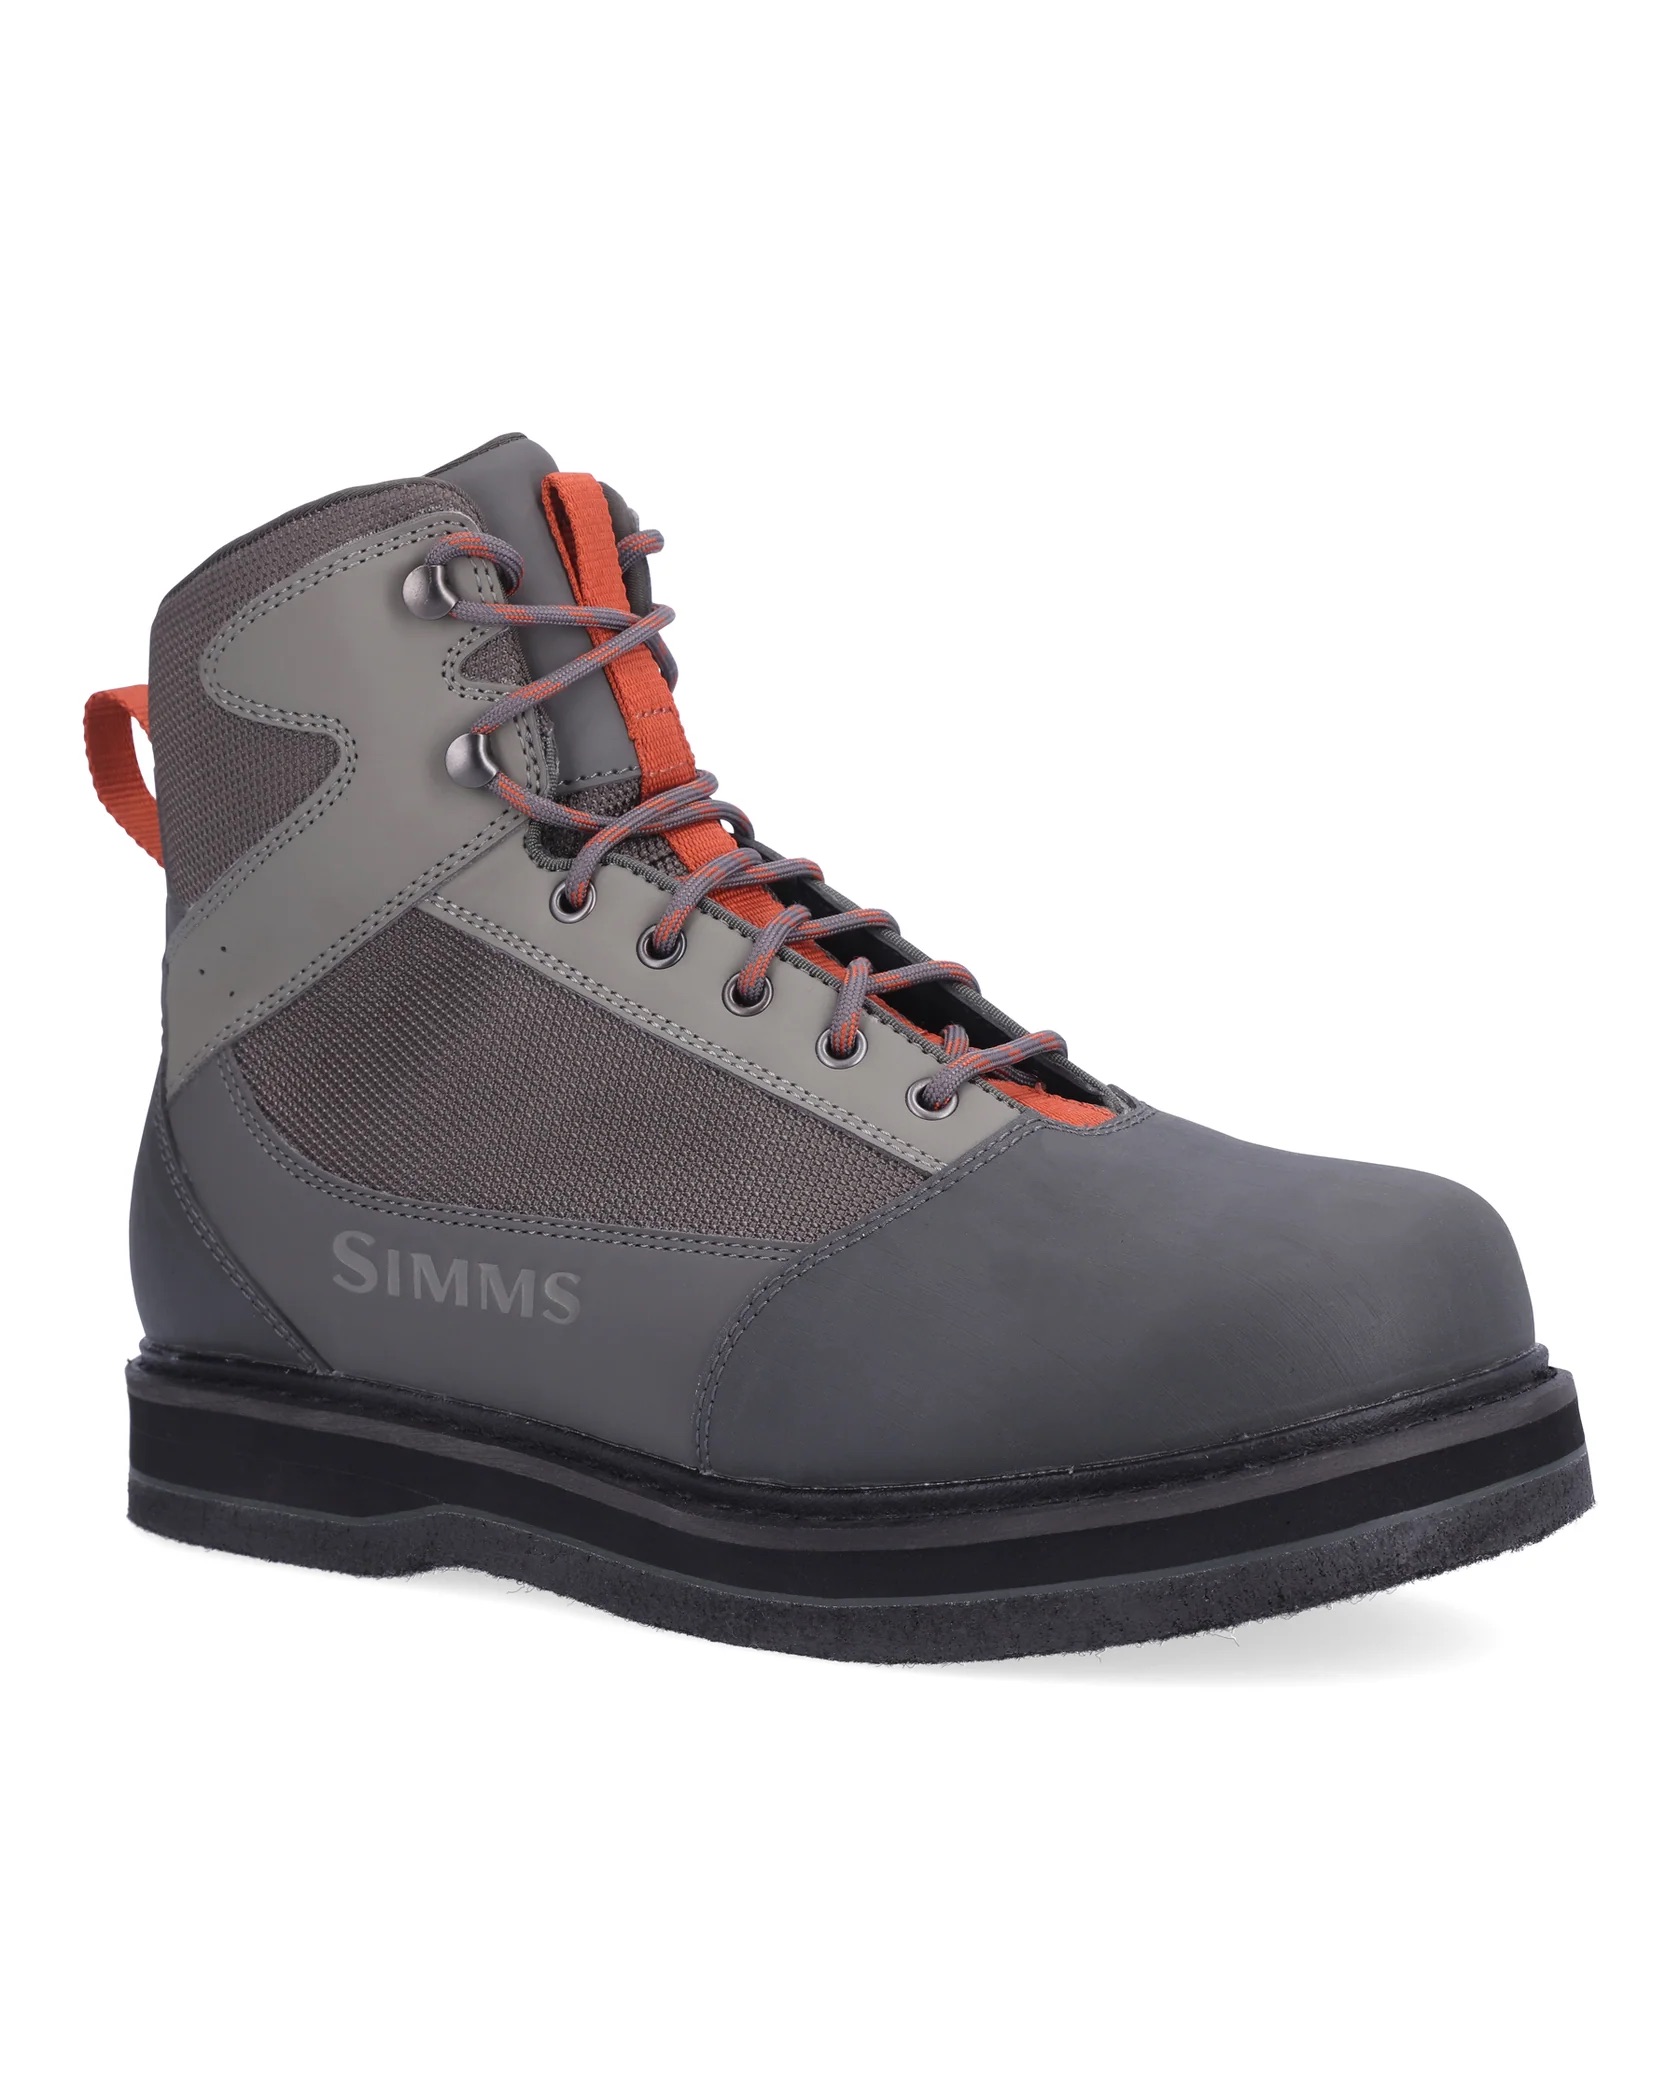 Simms Tributary Wading Boot - Felt - Size 9